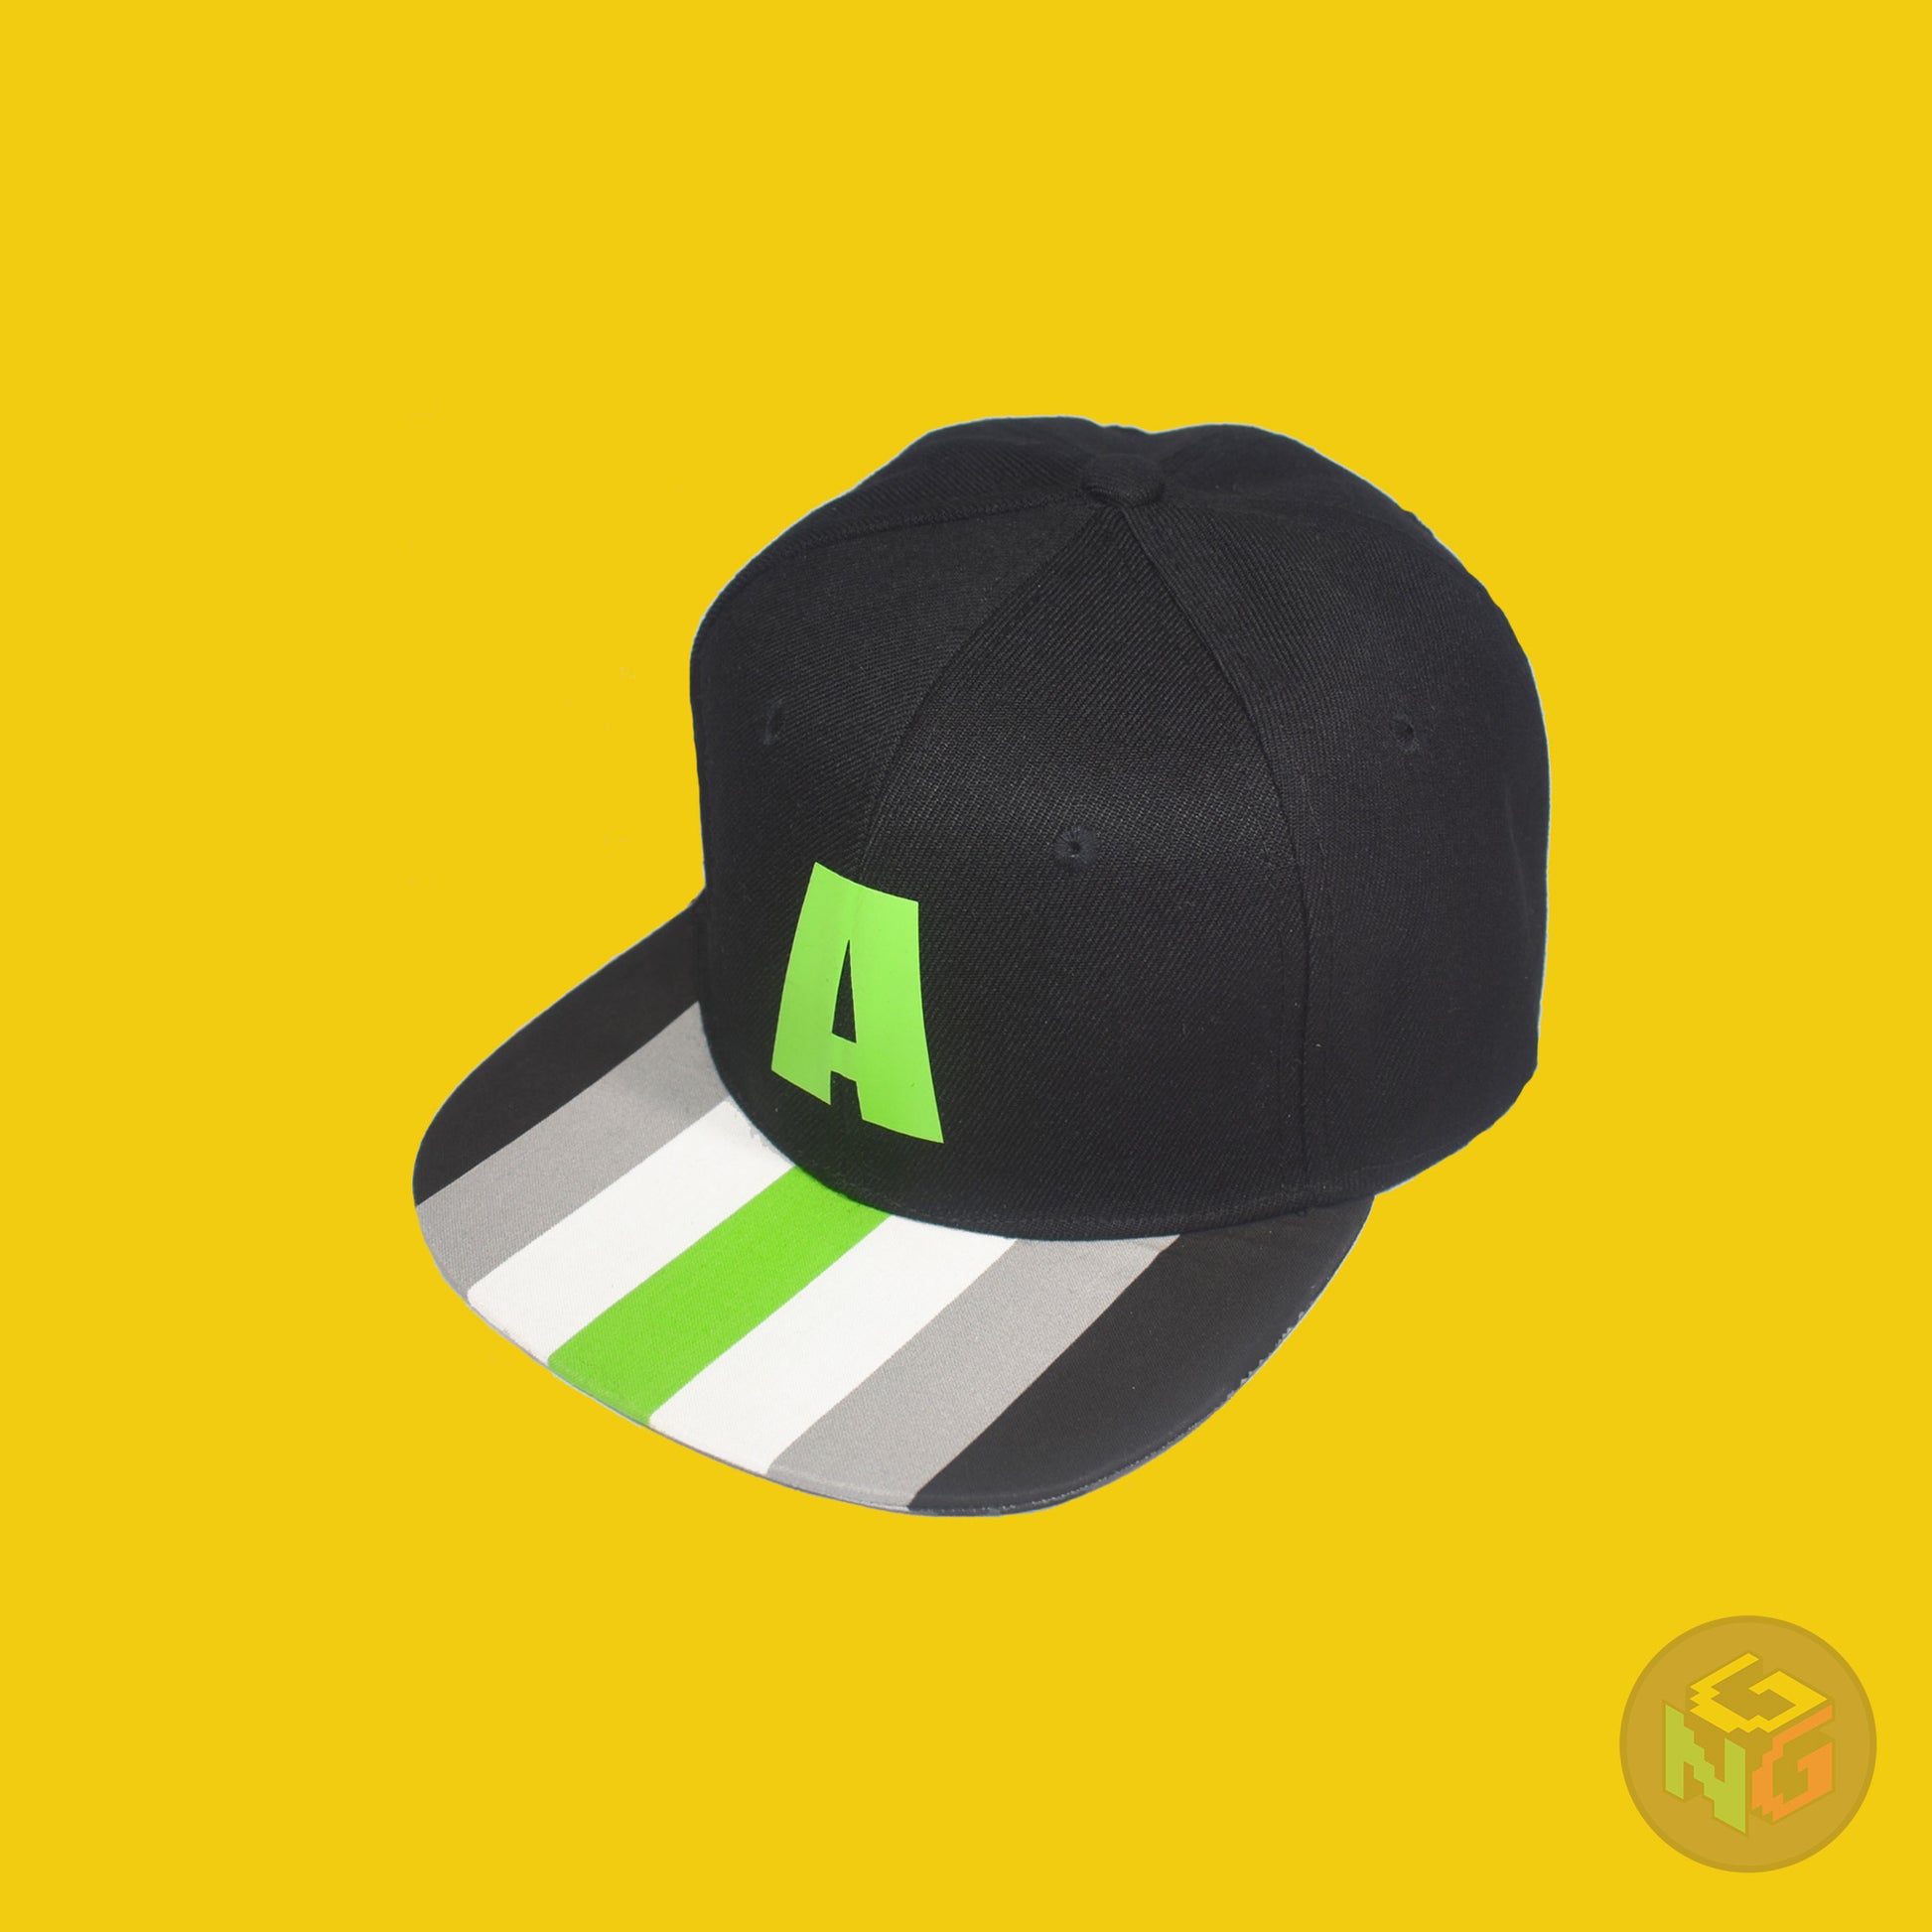 Black flat bill snapback hat. The brim has the agender pride flag on both sides and the front of the hat has a green letter “A”. Front left view